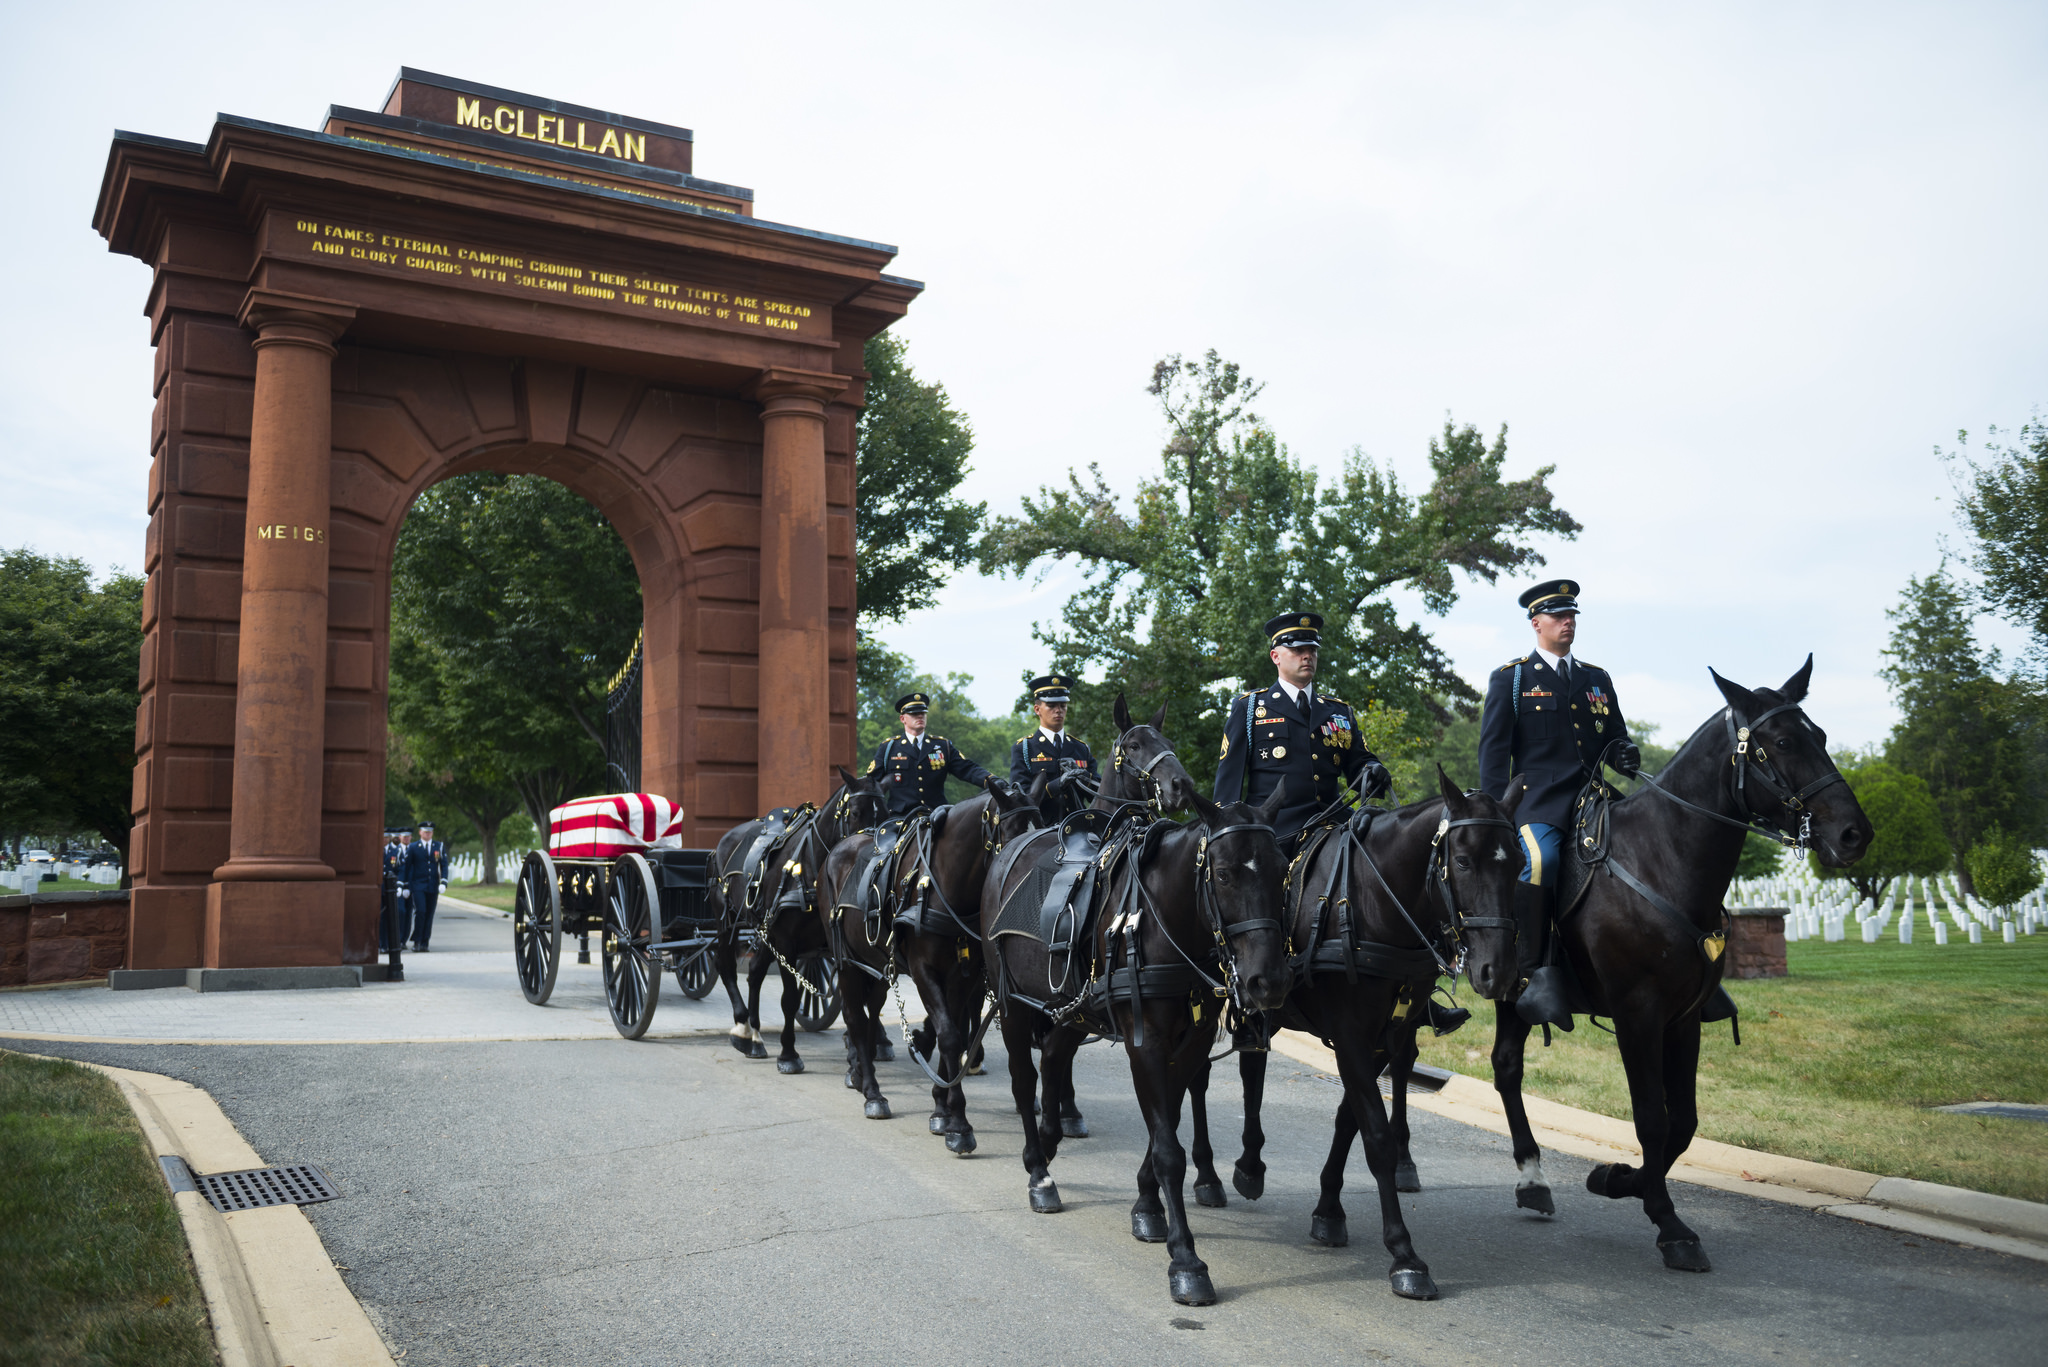 A horse-drawn caisson in a military funeral honors procession